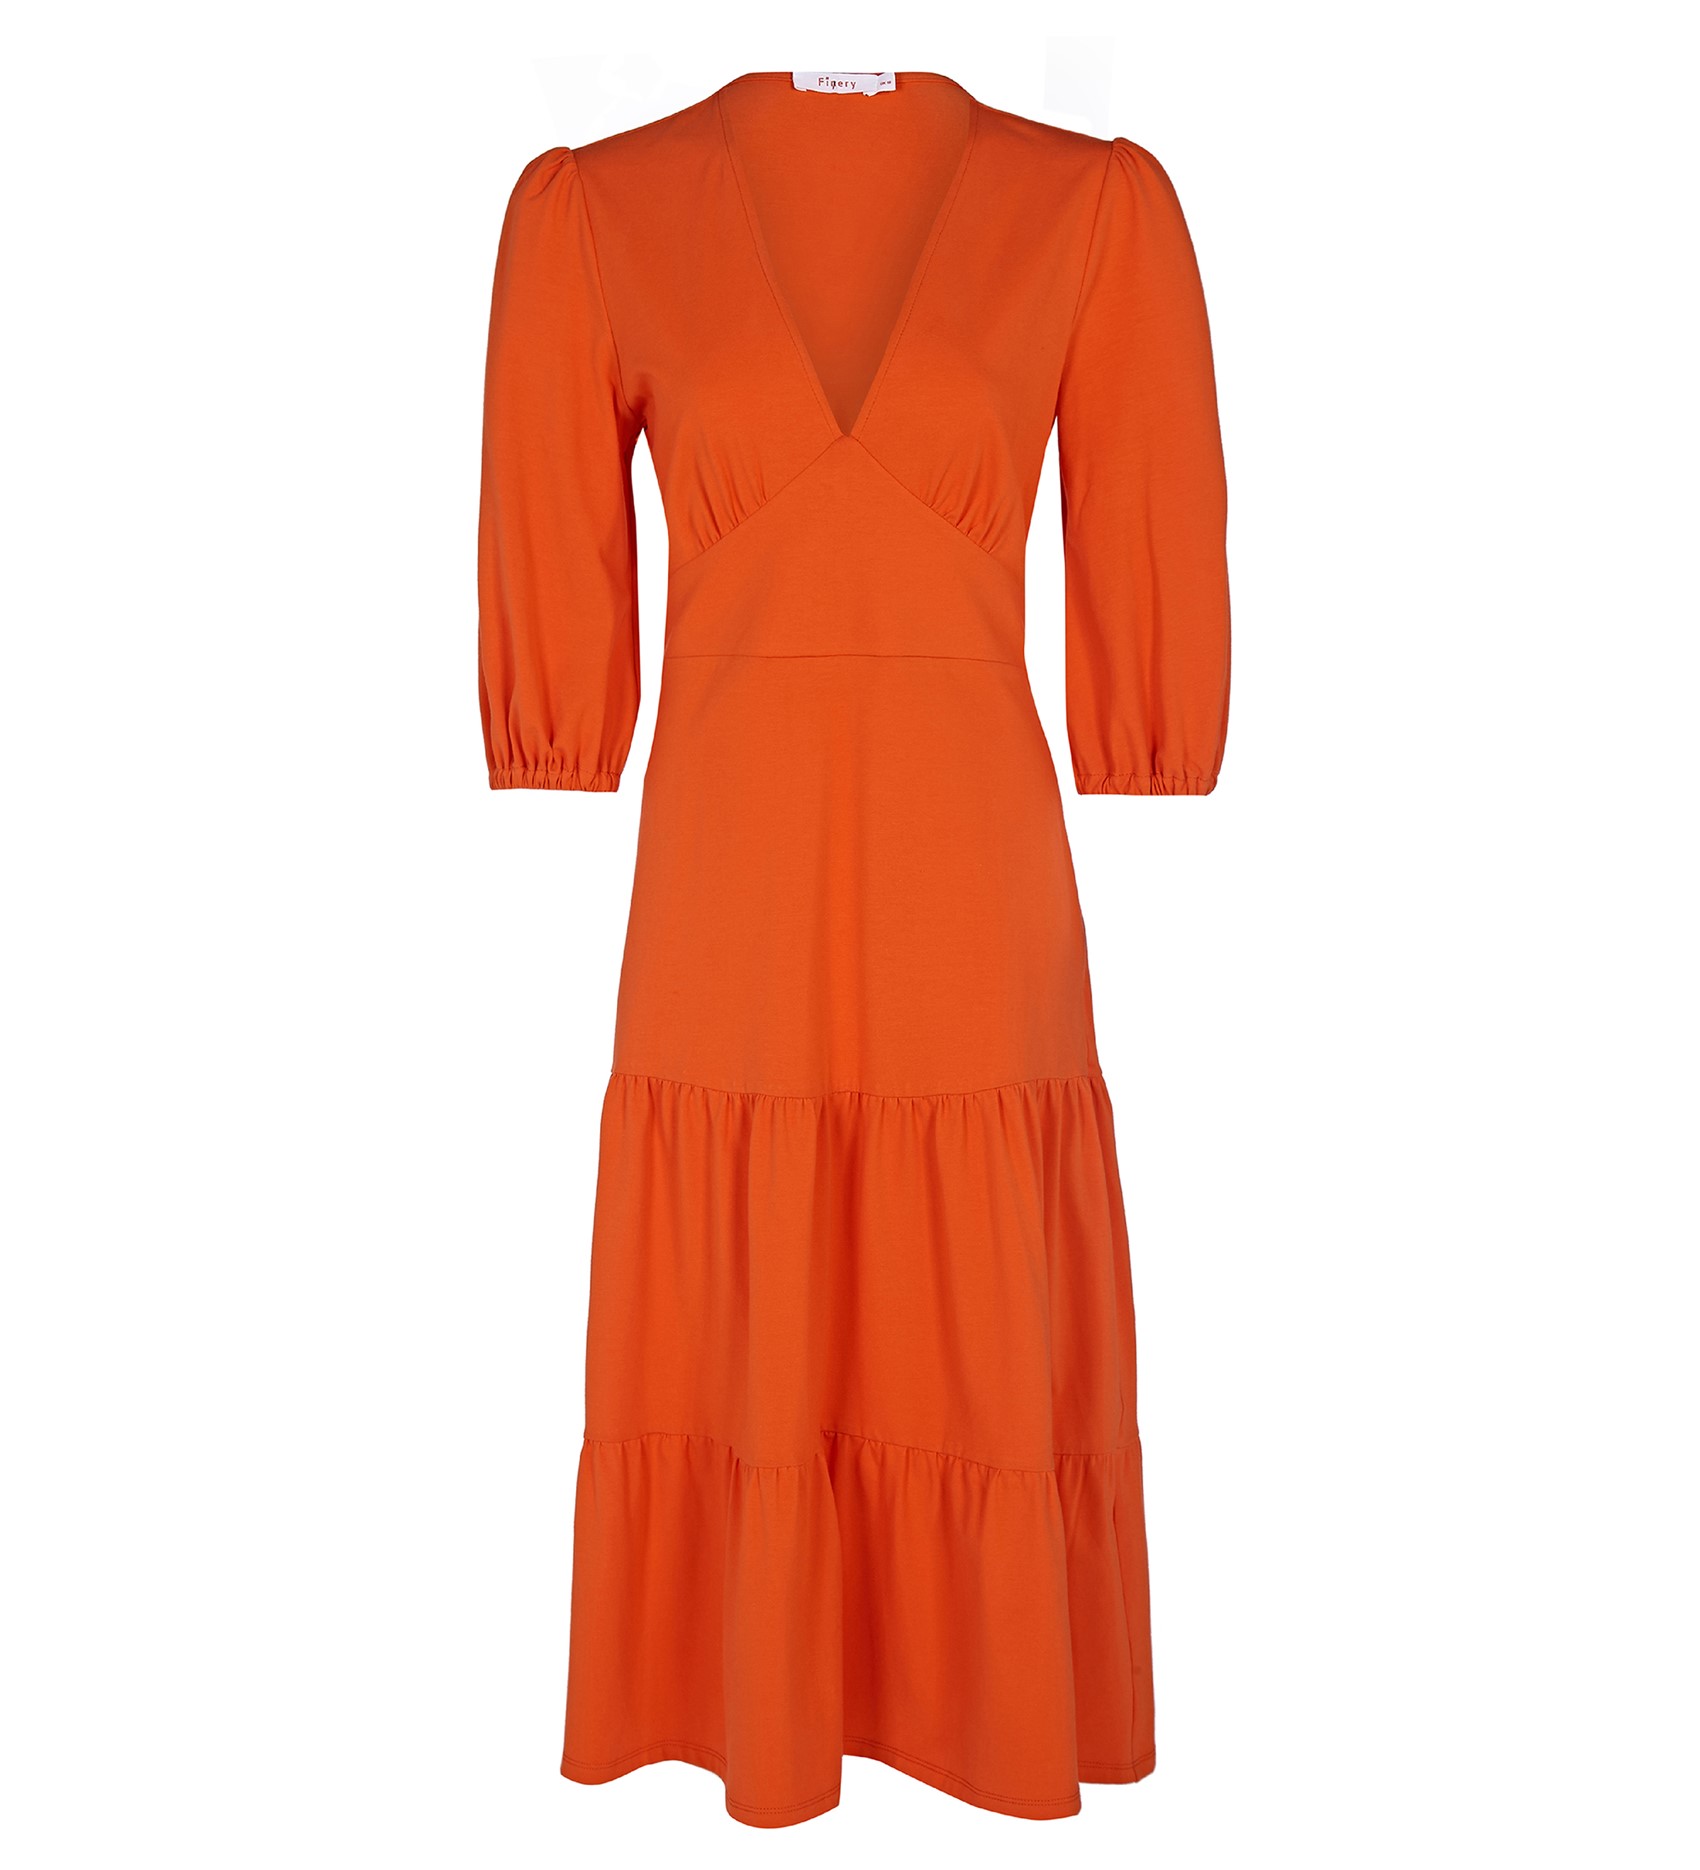 Cotton Fit/Flare Dress in Orange with Tiered Detailing | Finery London